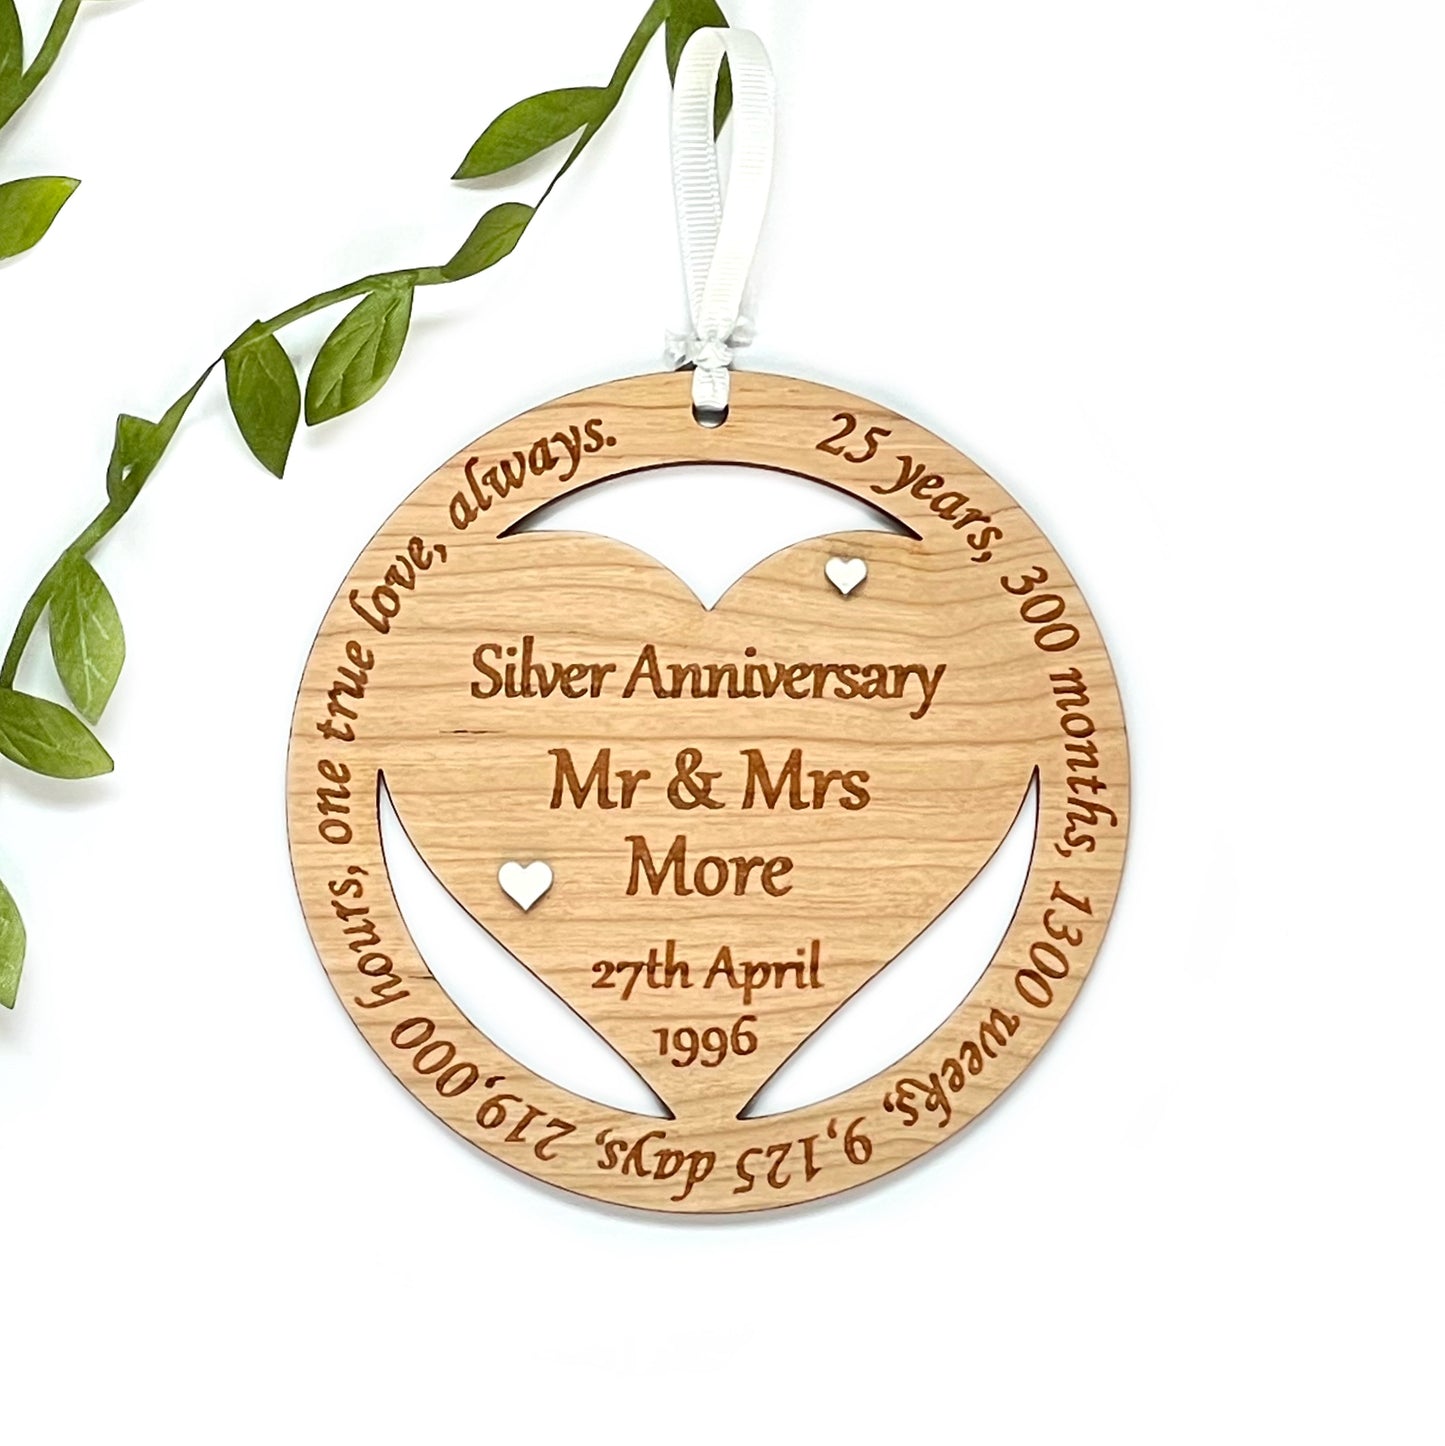 Silver Wedding Anniversary Gift Wooden Hanging Plaque 25th Anniversary